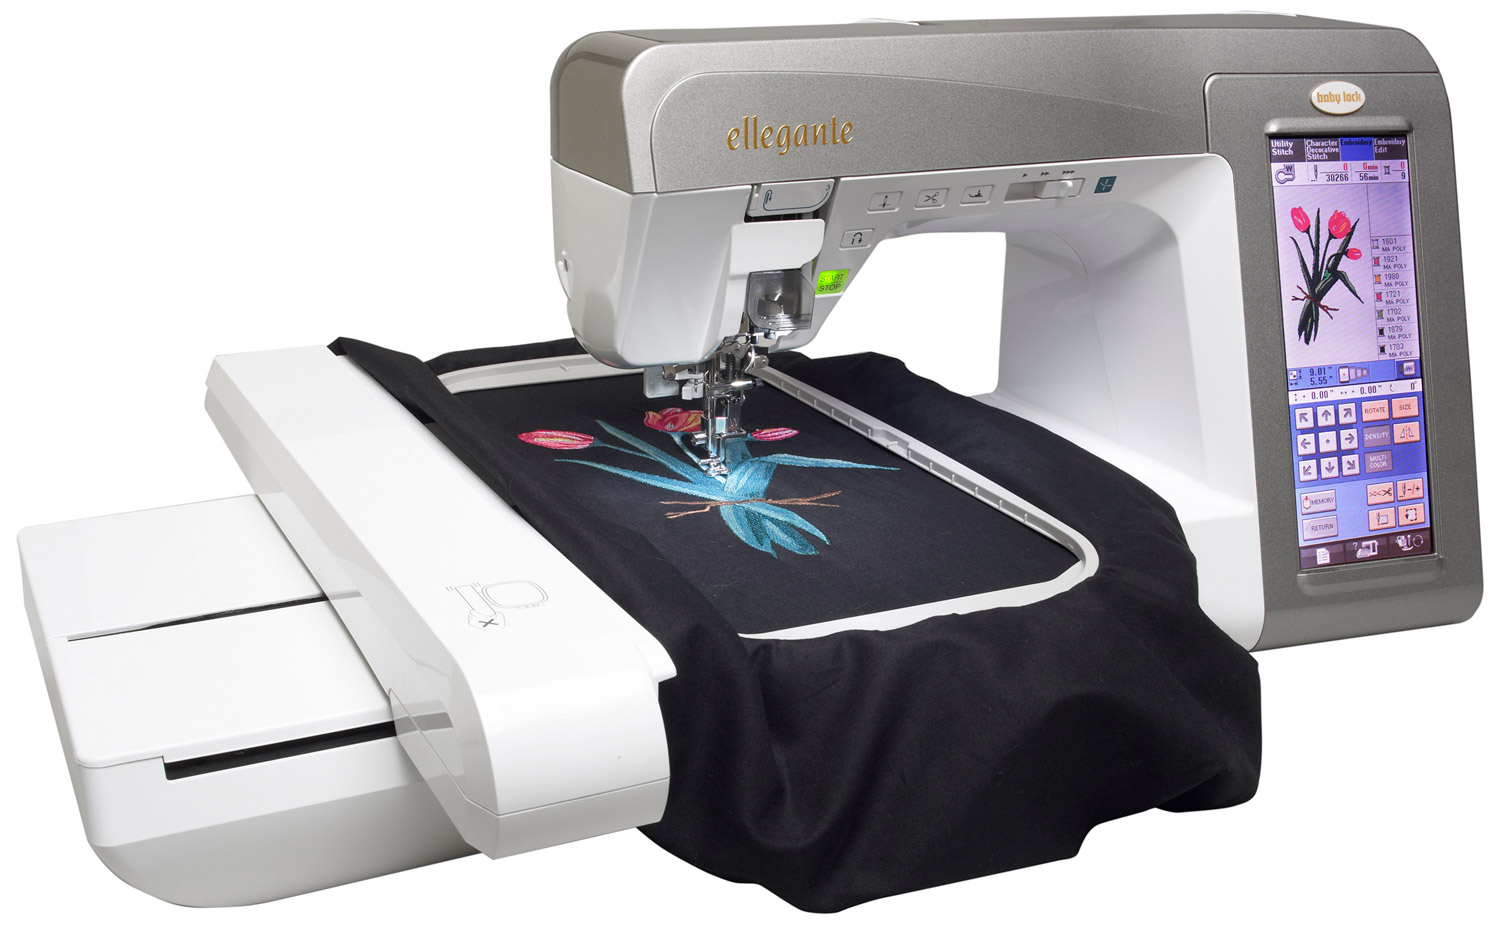 What Points To Think When You Buy An Embroidery Machine?